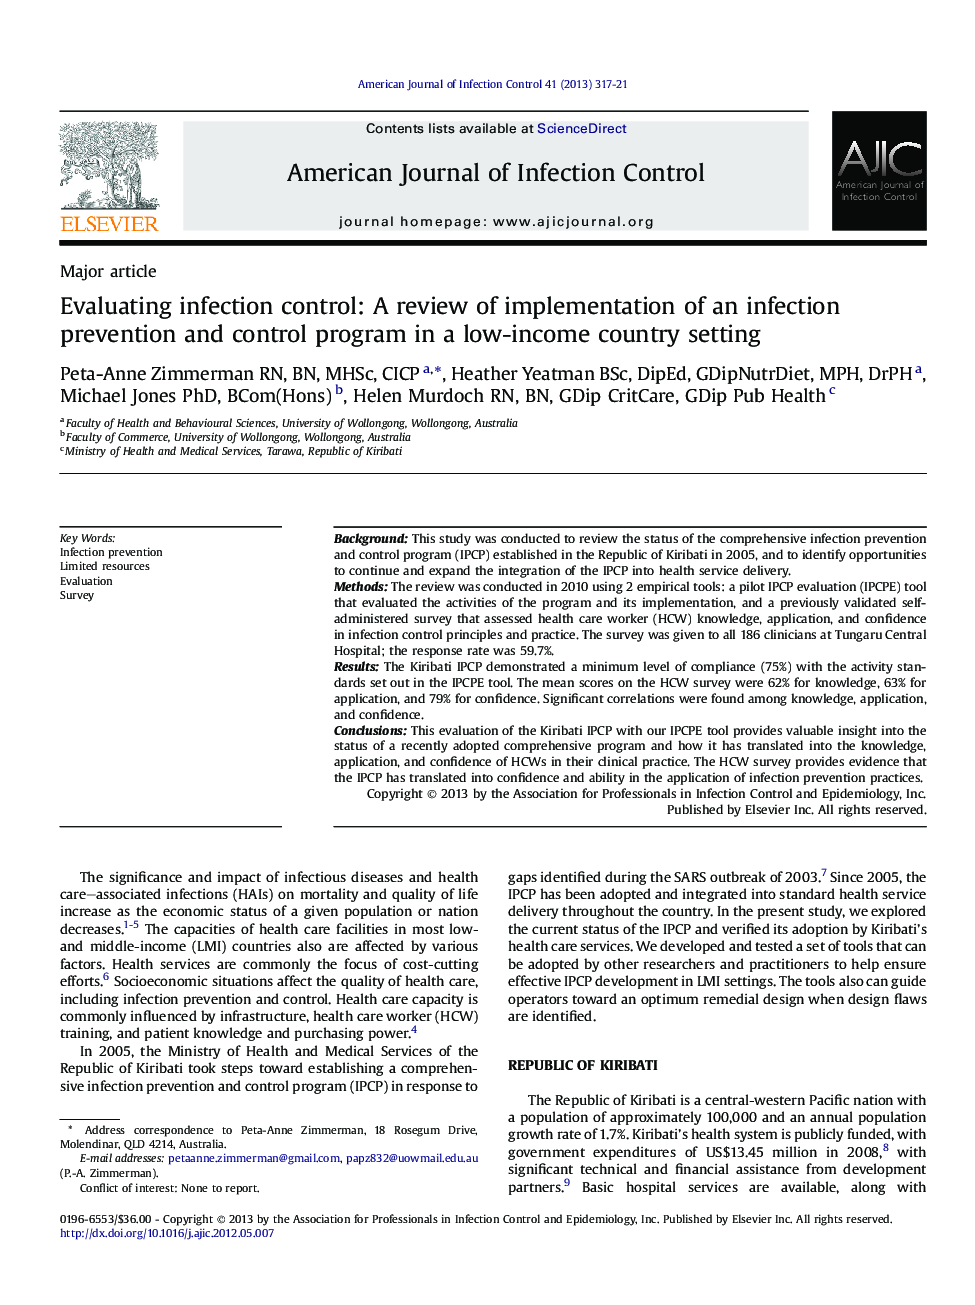 Evaluating infection control: A review of implementation of an infection prevention and control program in a low-income country setting 